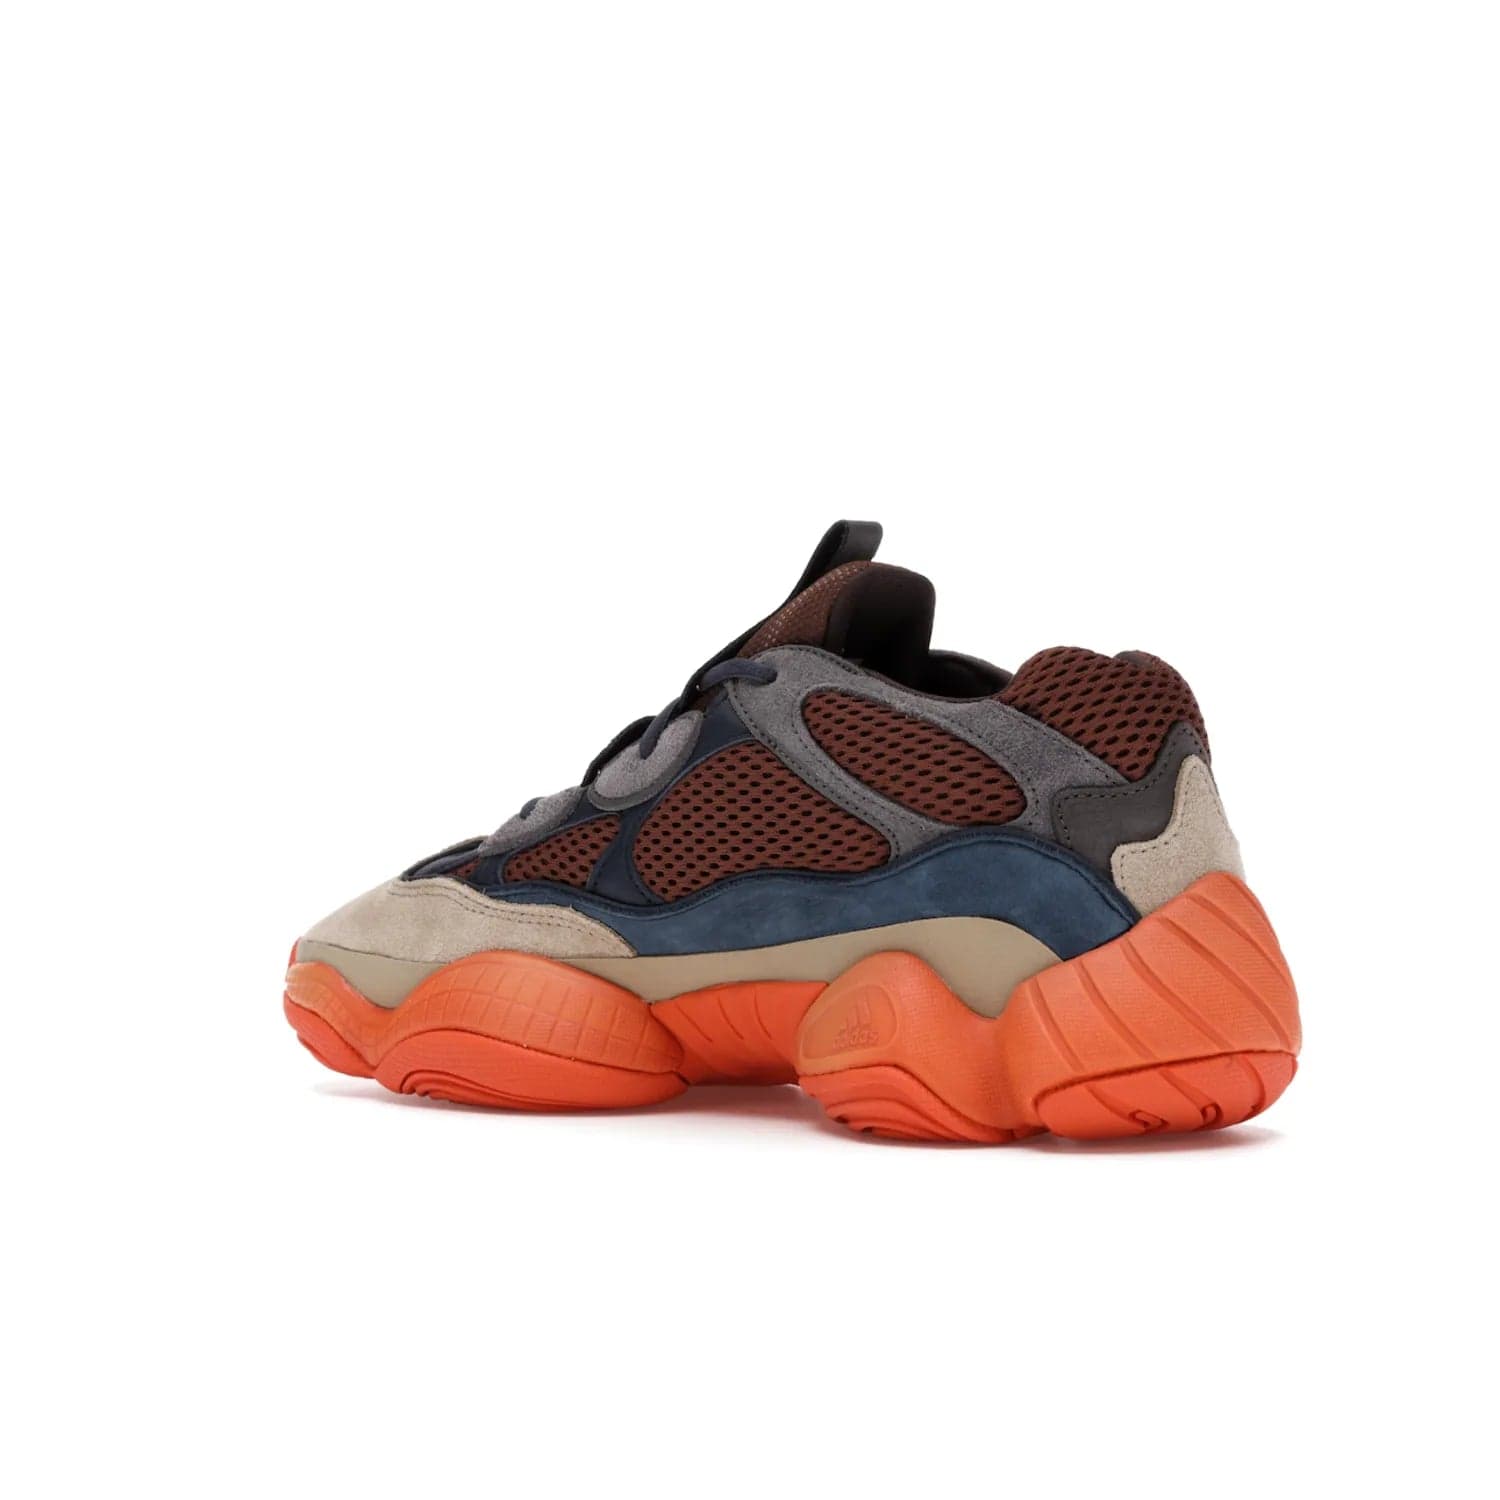 adidas Yeezy 500 Enflame - Image 23 - Only at www.BallersClubKickz.com - Step into style with the adidas Yeezy 500 Enflame. Mix of mesh, leather, and suede layered together to create tonal-brown, dark blue, & orange. Orange AdiPRENE sole provides superior cushioning & comfort. Get yours and experience maximum style.